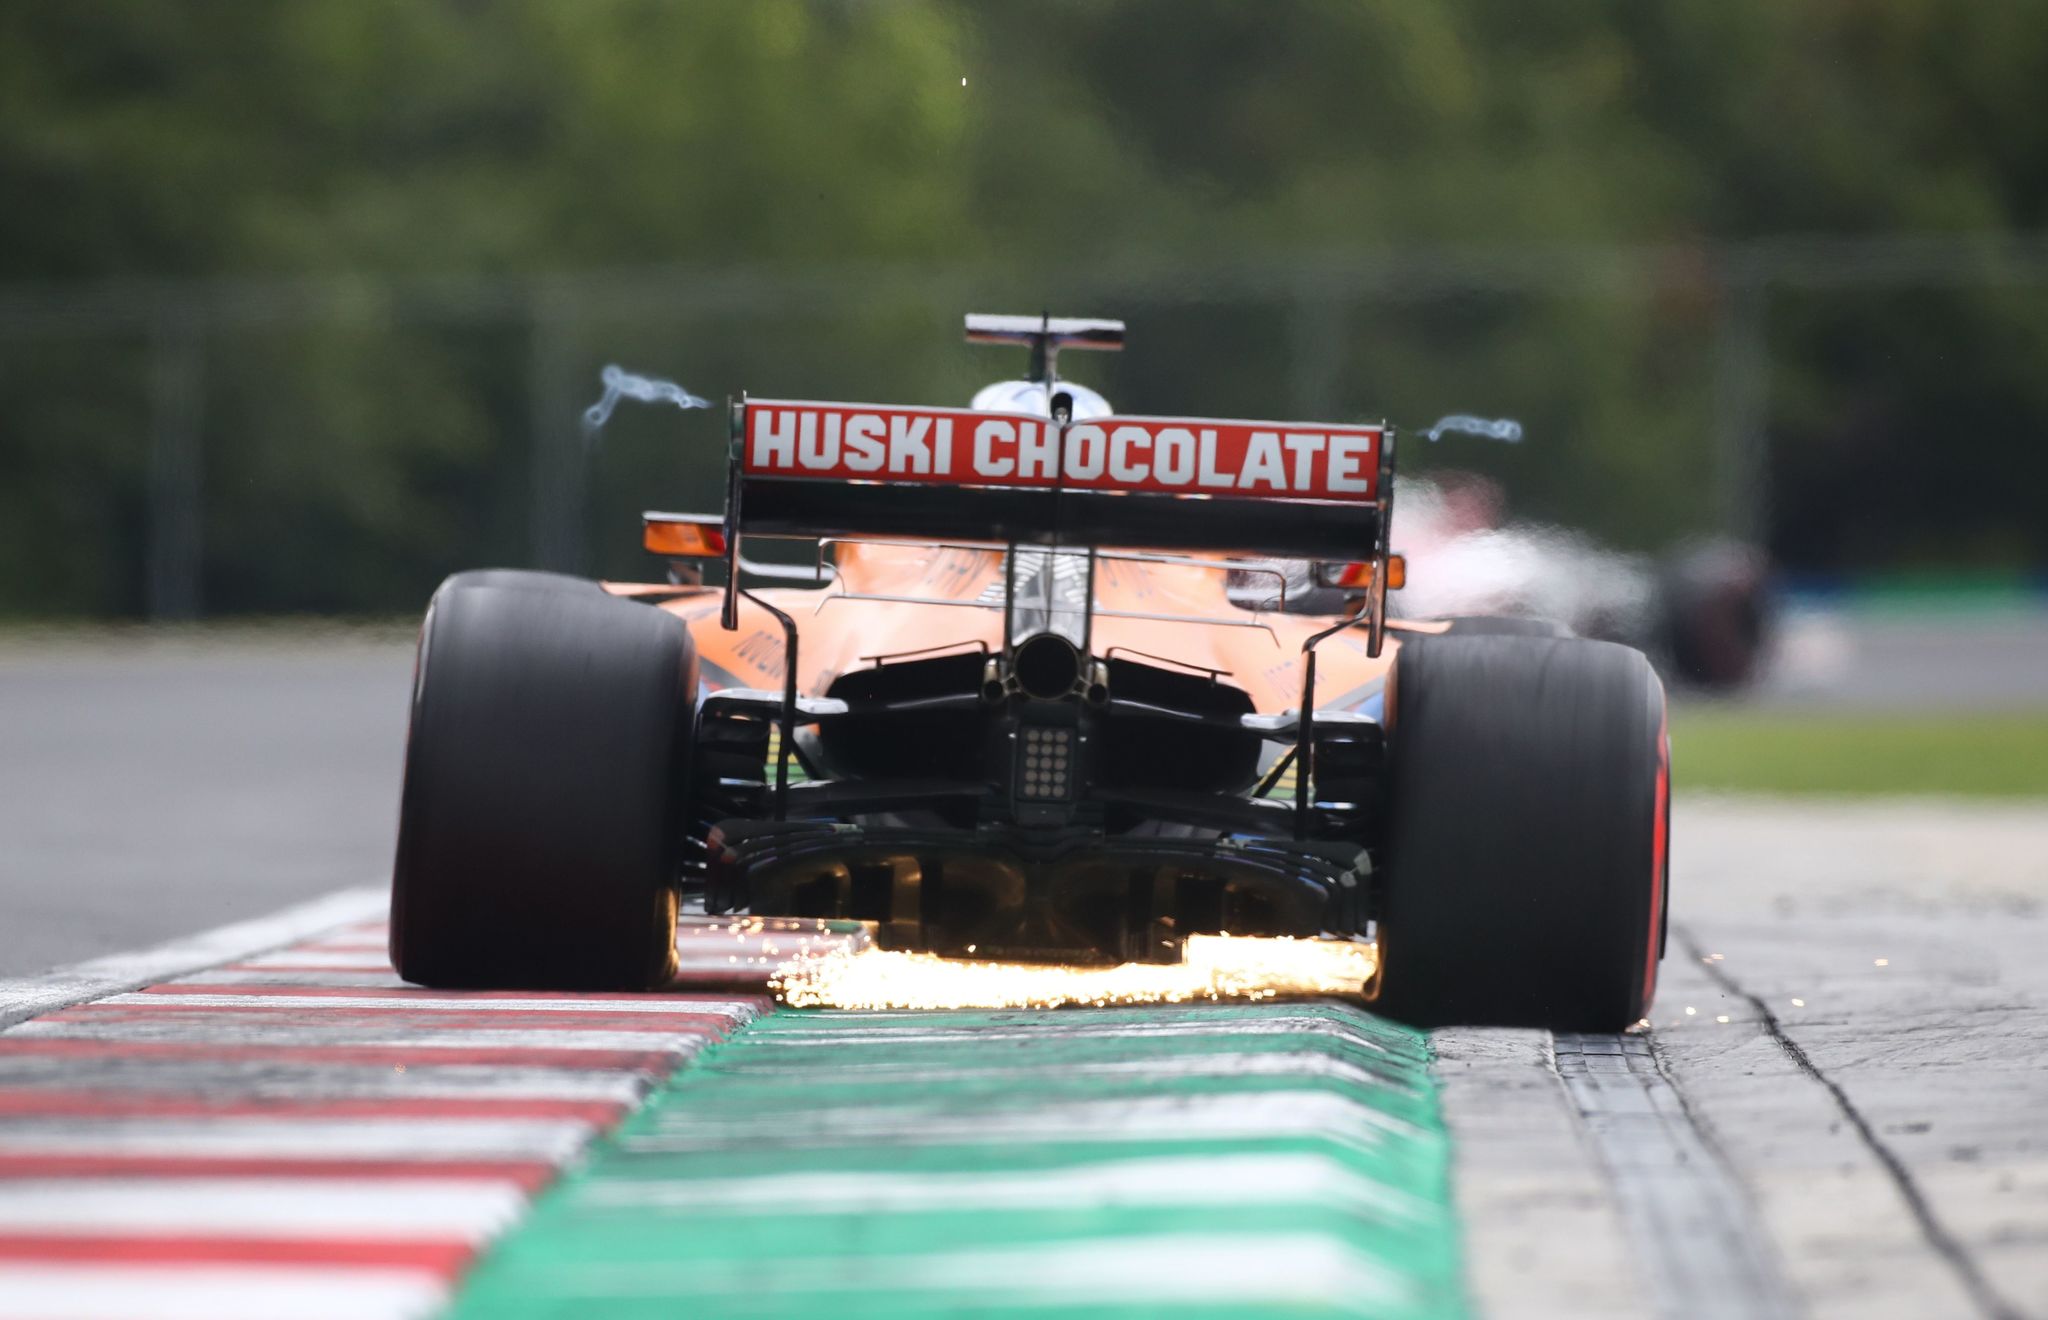 McLarens Spanish driver Carlos lt;HIT gt;Sainz lt;/HIT gt; Jr steers his car during the qualifying session for the Formula One Hungarian Grand Prix at the Hungaroring circuit in Mogyorod near Budapest, Hungary, on July 18, 2020. (Photo by Mark Thompson / POOL / AFP)